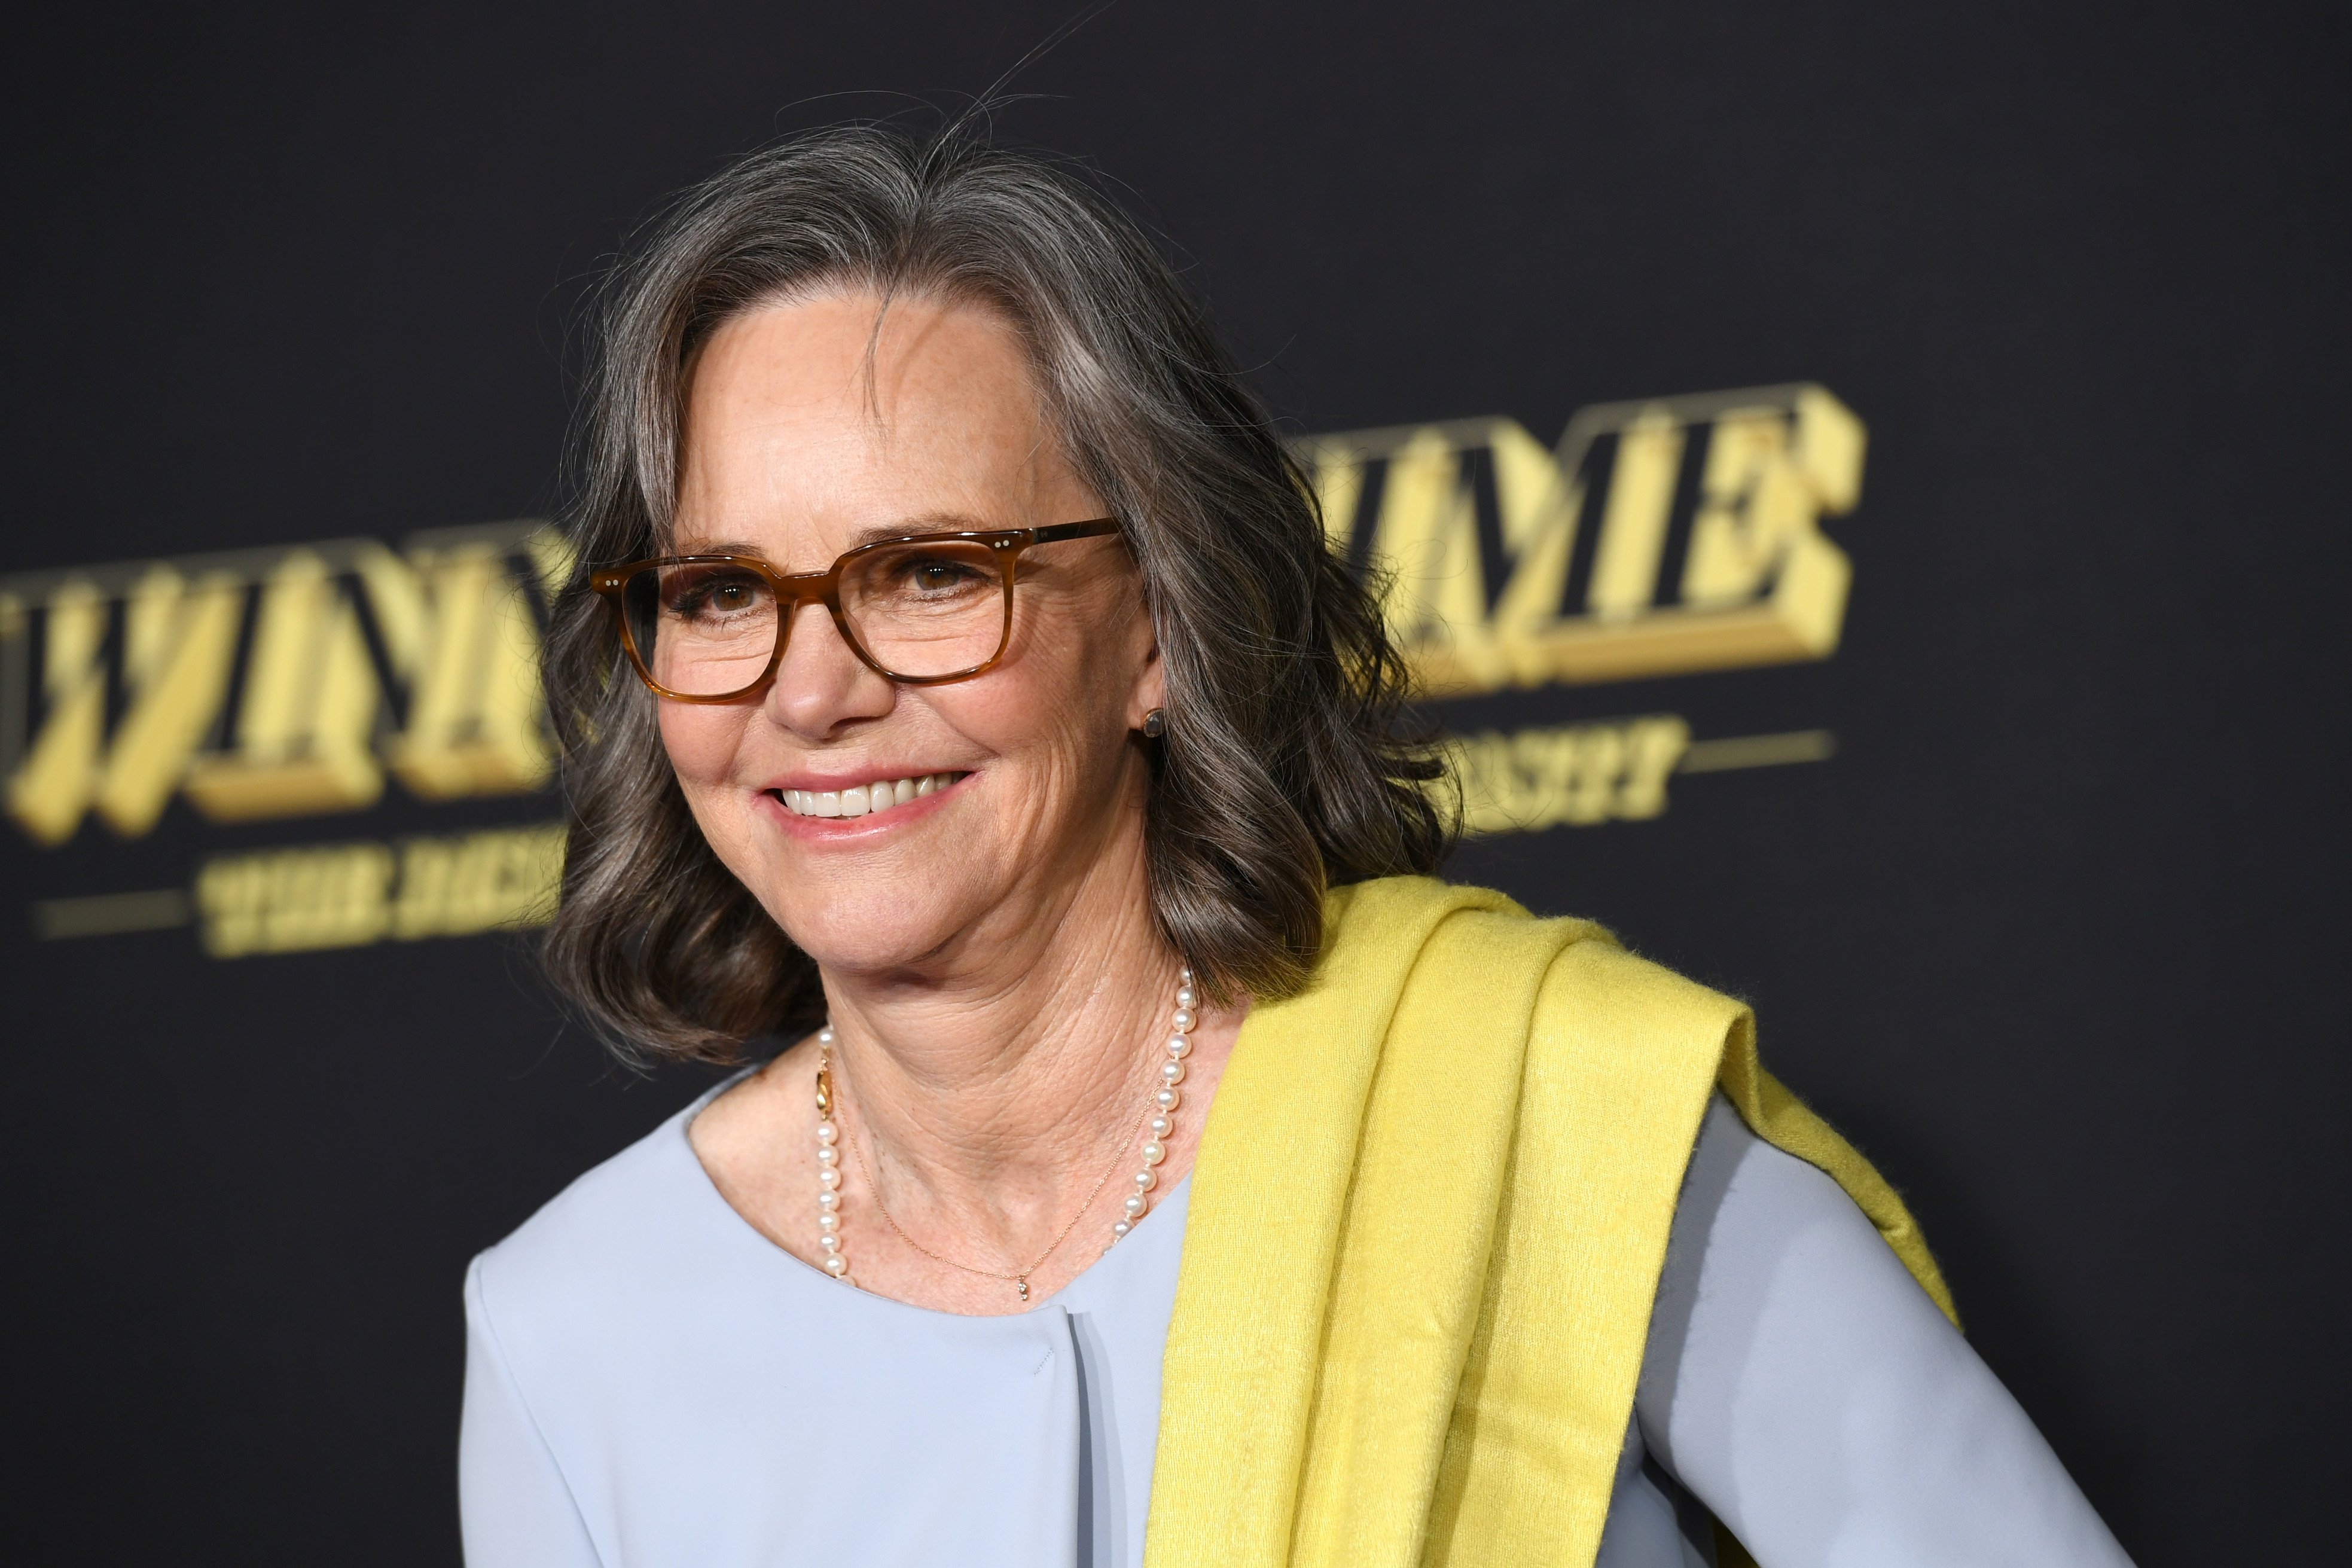 Sally Field attends the premiere of HBO's "Winning Time: The Rise Of The Lakers Dynasty" at The Theatre at Ace Hotel on March 02, 2022 in Los Angeles, California. | Source: Getty Images